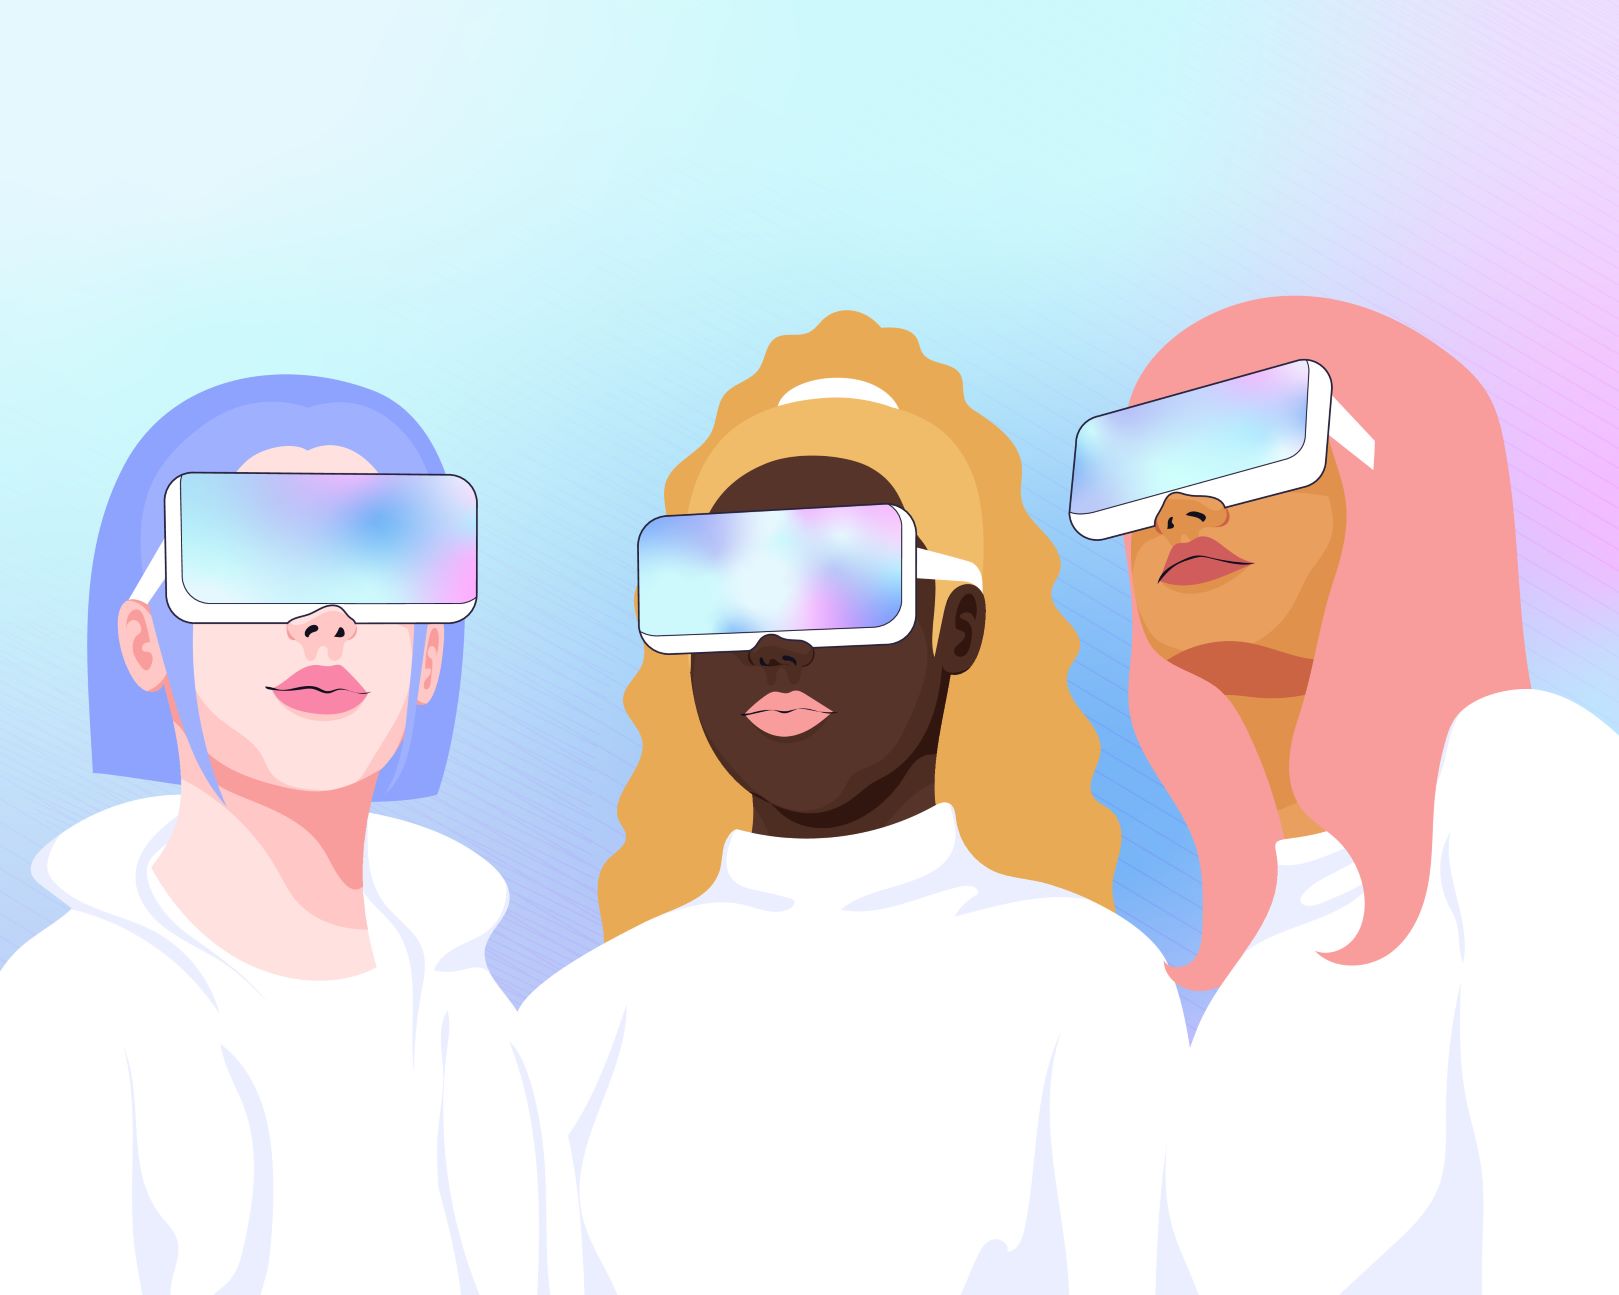 Drawing of 3 women wearing vr headsets.